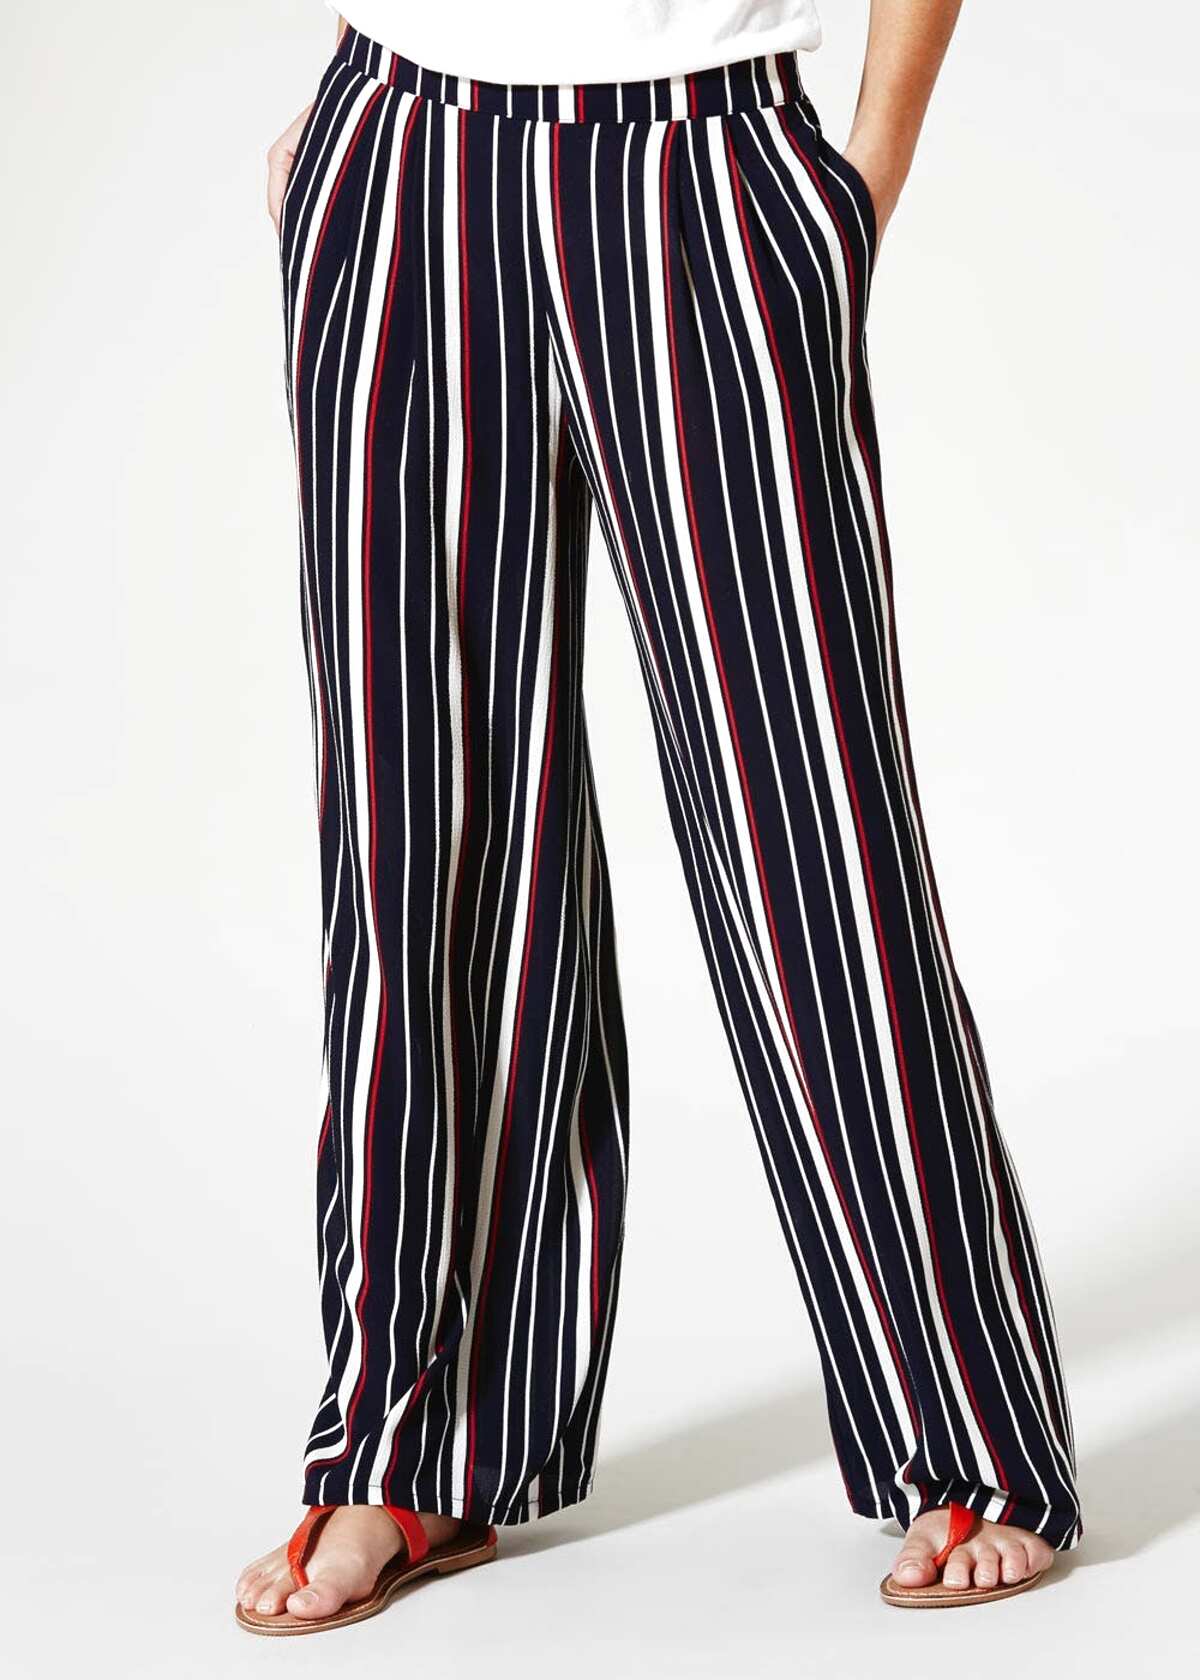 Matalan Ladies Trousers for sale in UK | 43 used Matalan Ladies Trousers